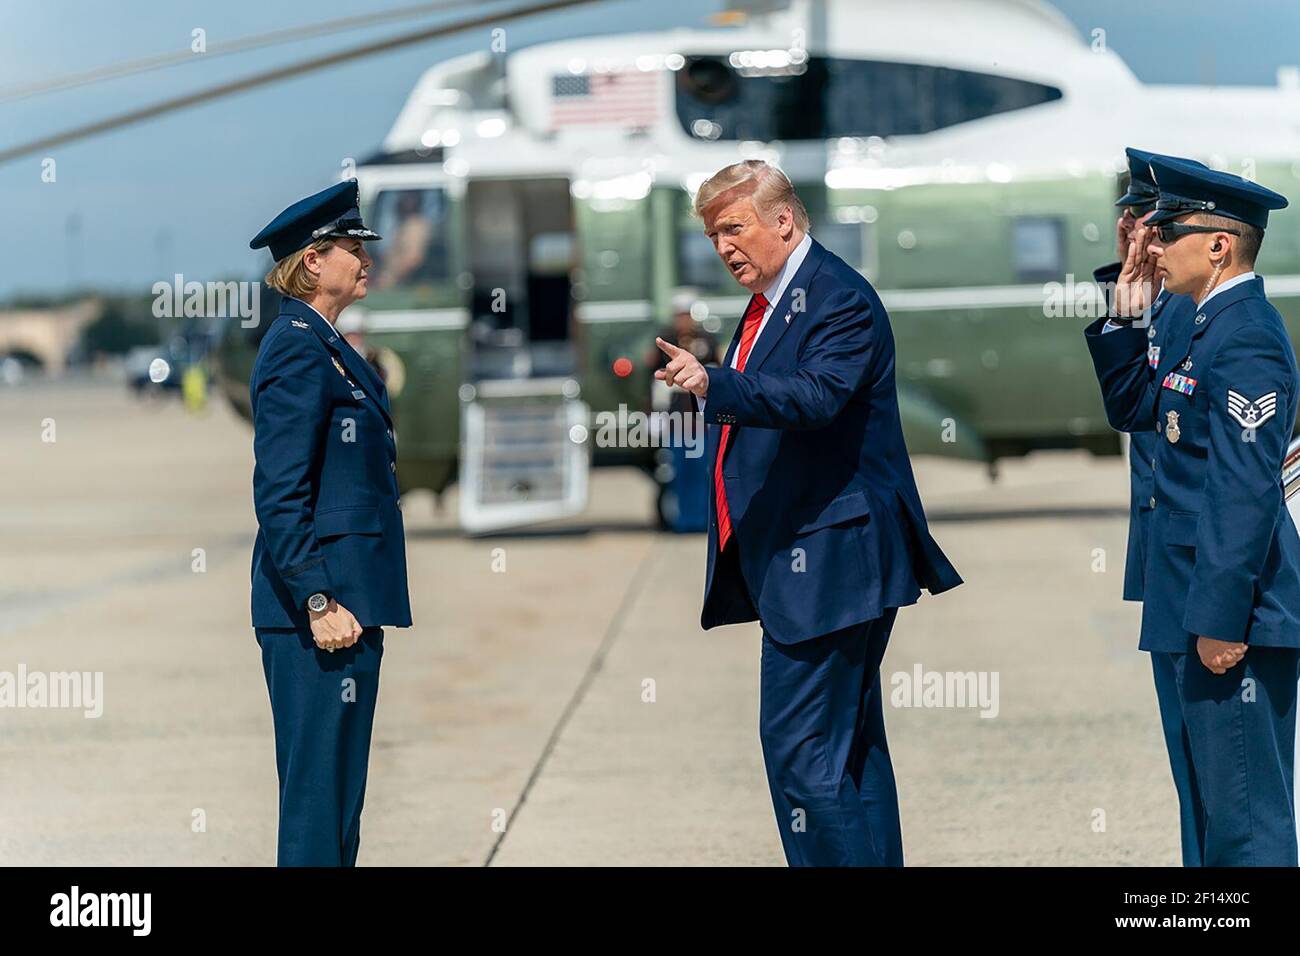 President Donald Trump is welcomed by U.S. Air Force Col. Rebecca J. Sonkiss Commander of the 89th Airlift Wing as he disembarks Air Force One at Joint Base Andrews Md. Thursday Sept. 26 2019. Stock Photo